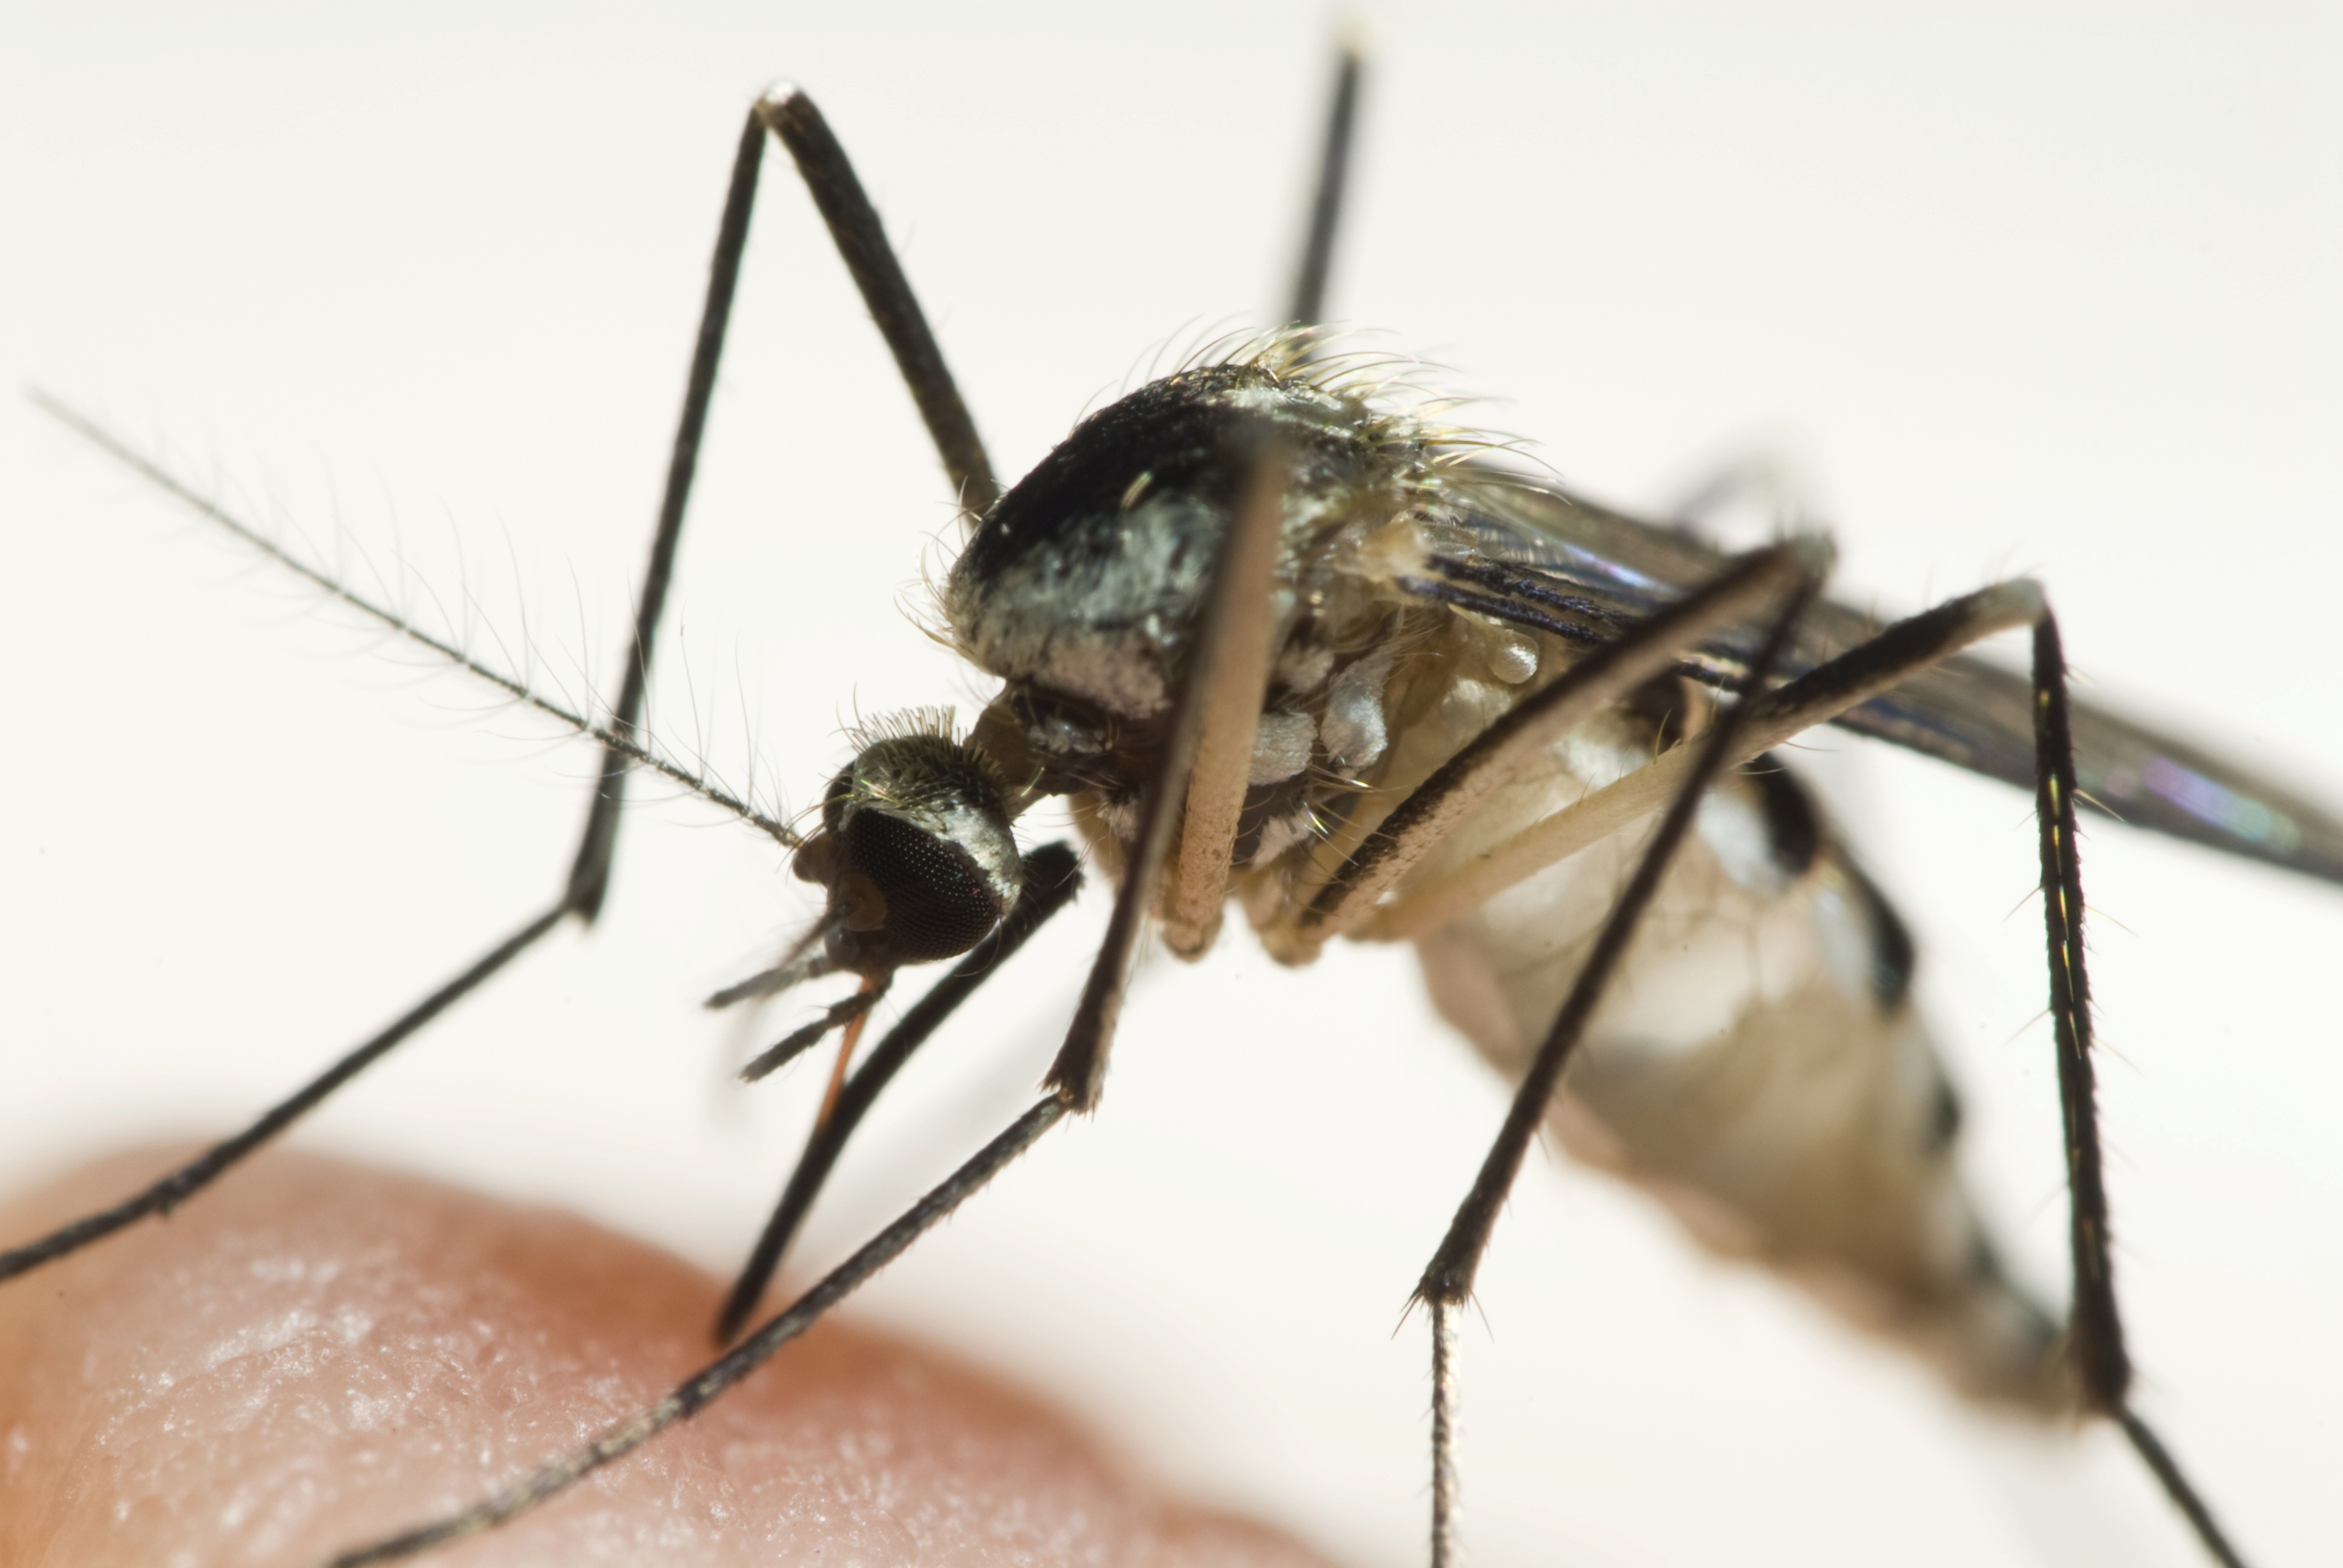 Extreme closeup of mosquito found prior to providing Mosquito Control in Boalsburg